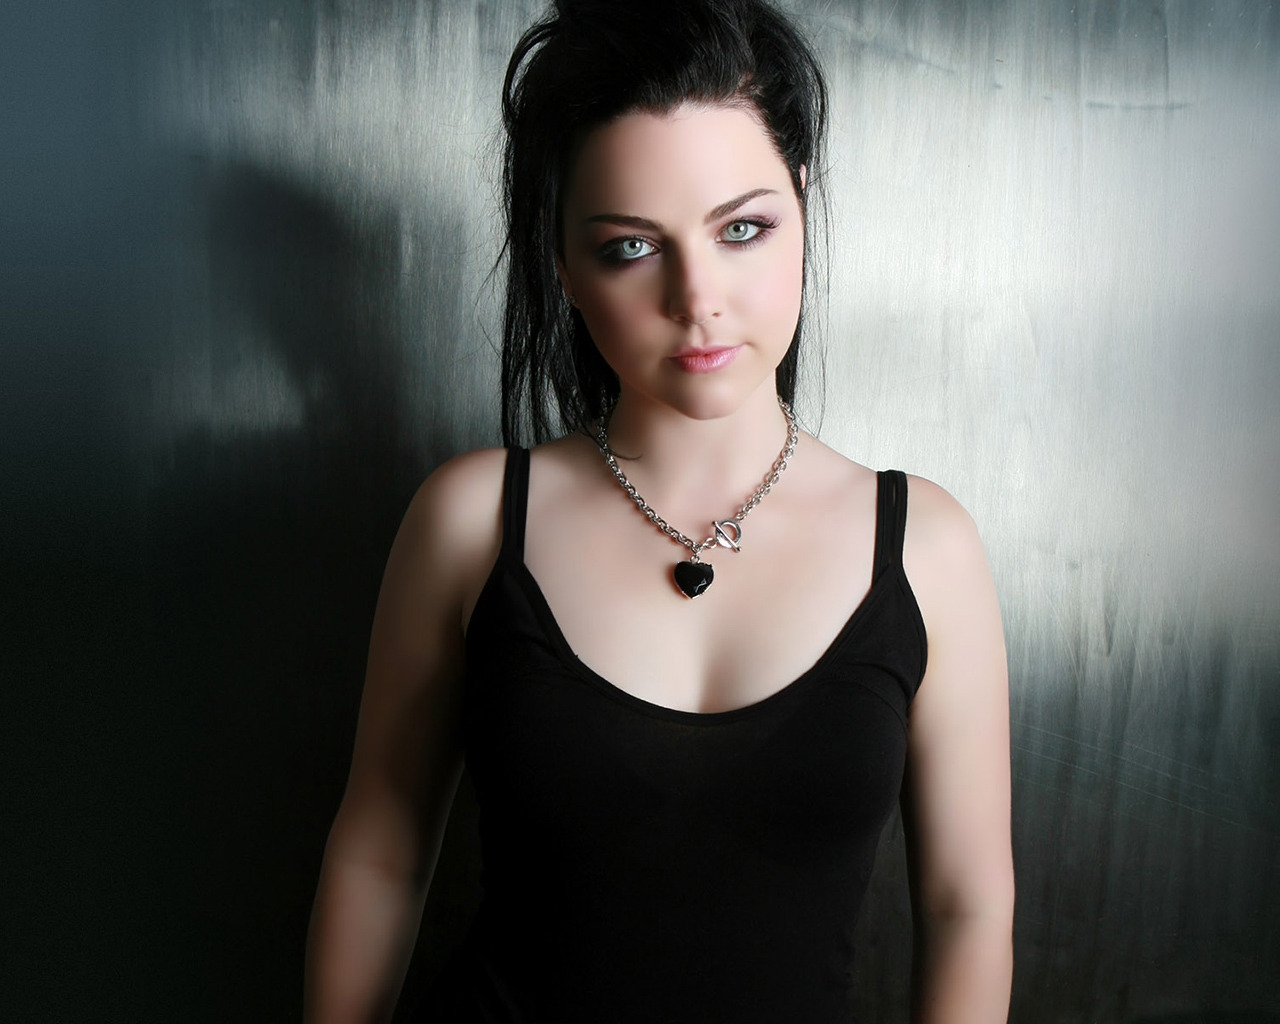 Amy Lee for 1280 x 1024 resolution